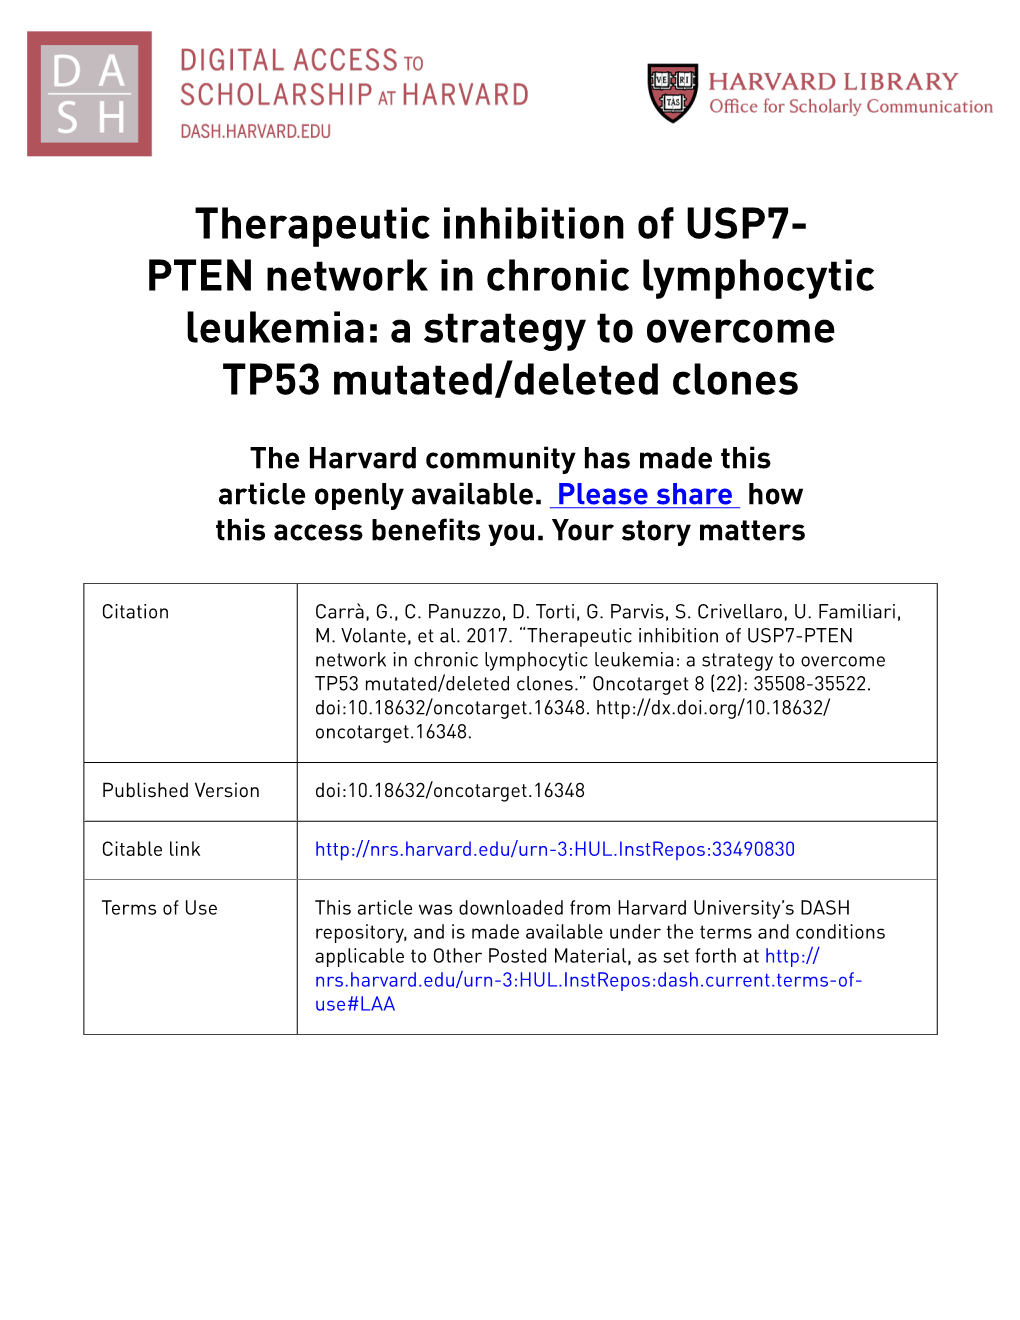 Therapeutic Inhibition of USP7- PTEN Network in Chronic Lymphocytic Leukemia: a Strategy to Overcome TP53 Mutated/Deleted Clones